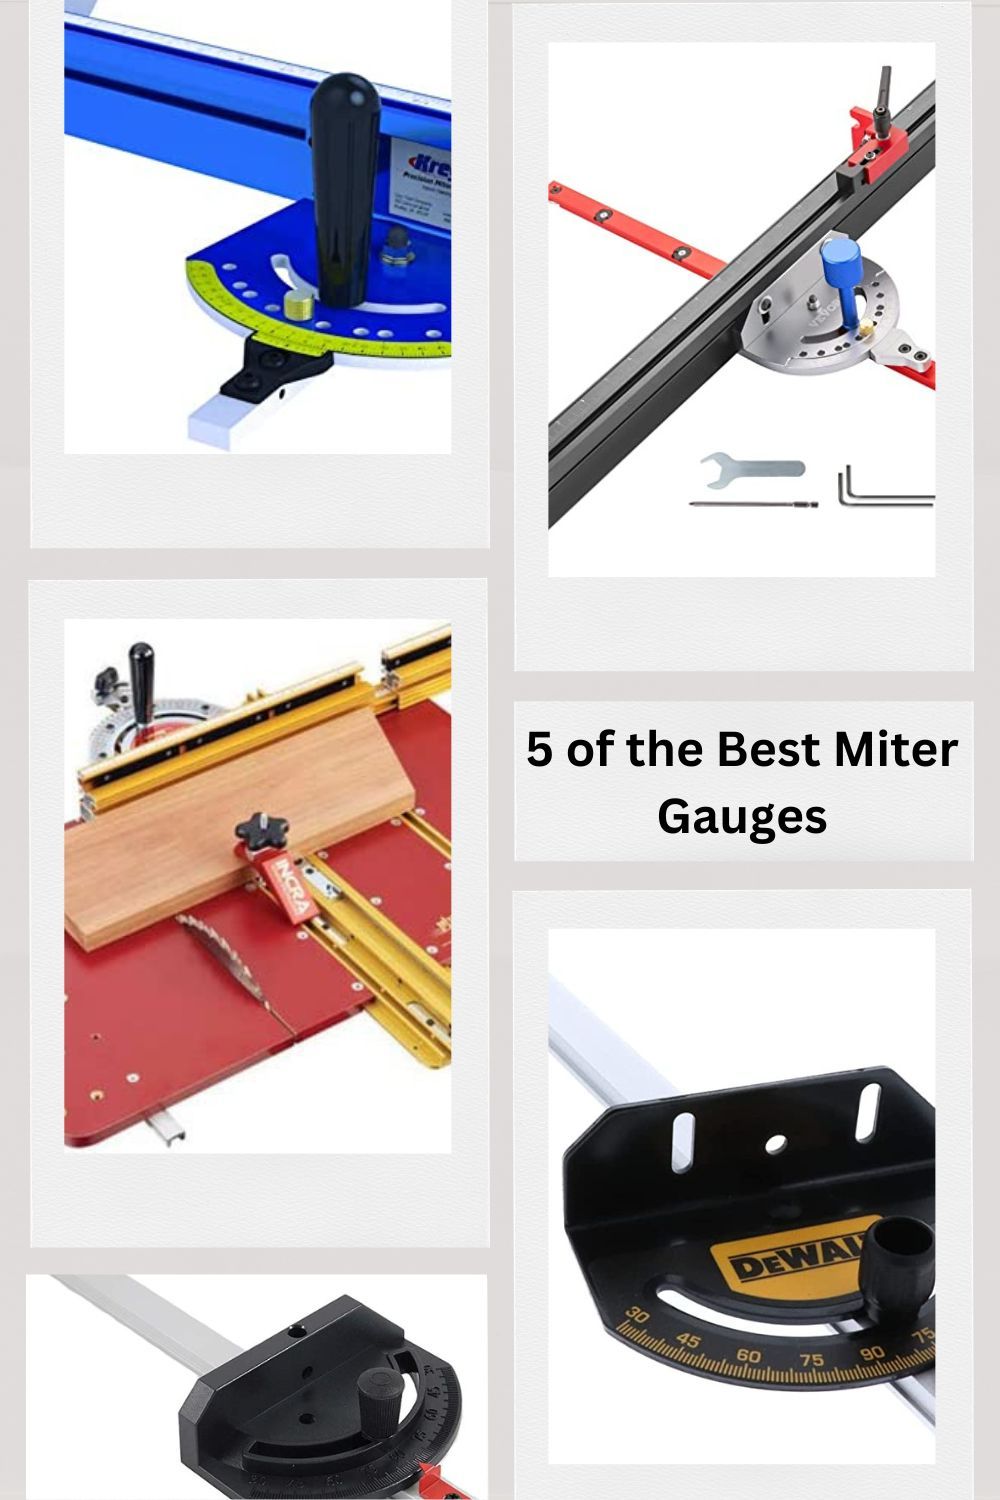 5 of the Best Miter Gauges for the Dewalt Table Saw (2022 Edition)